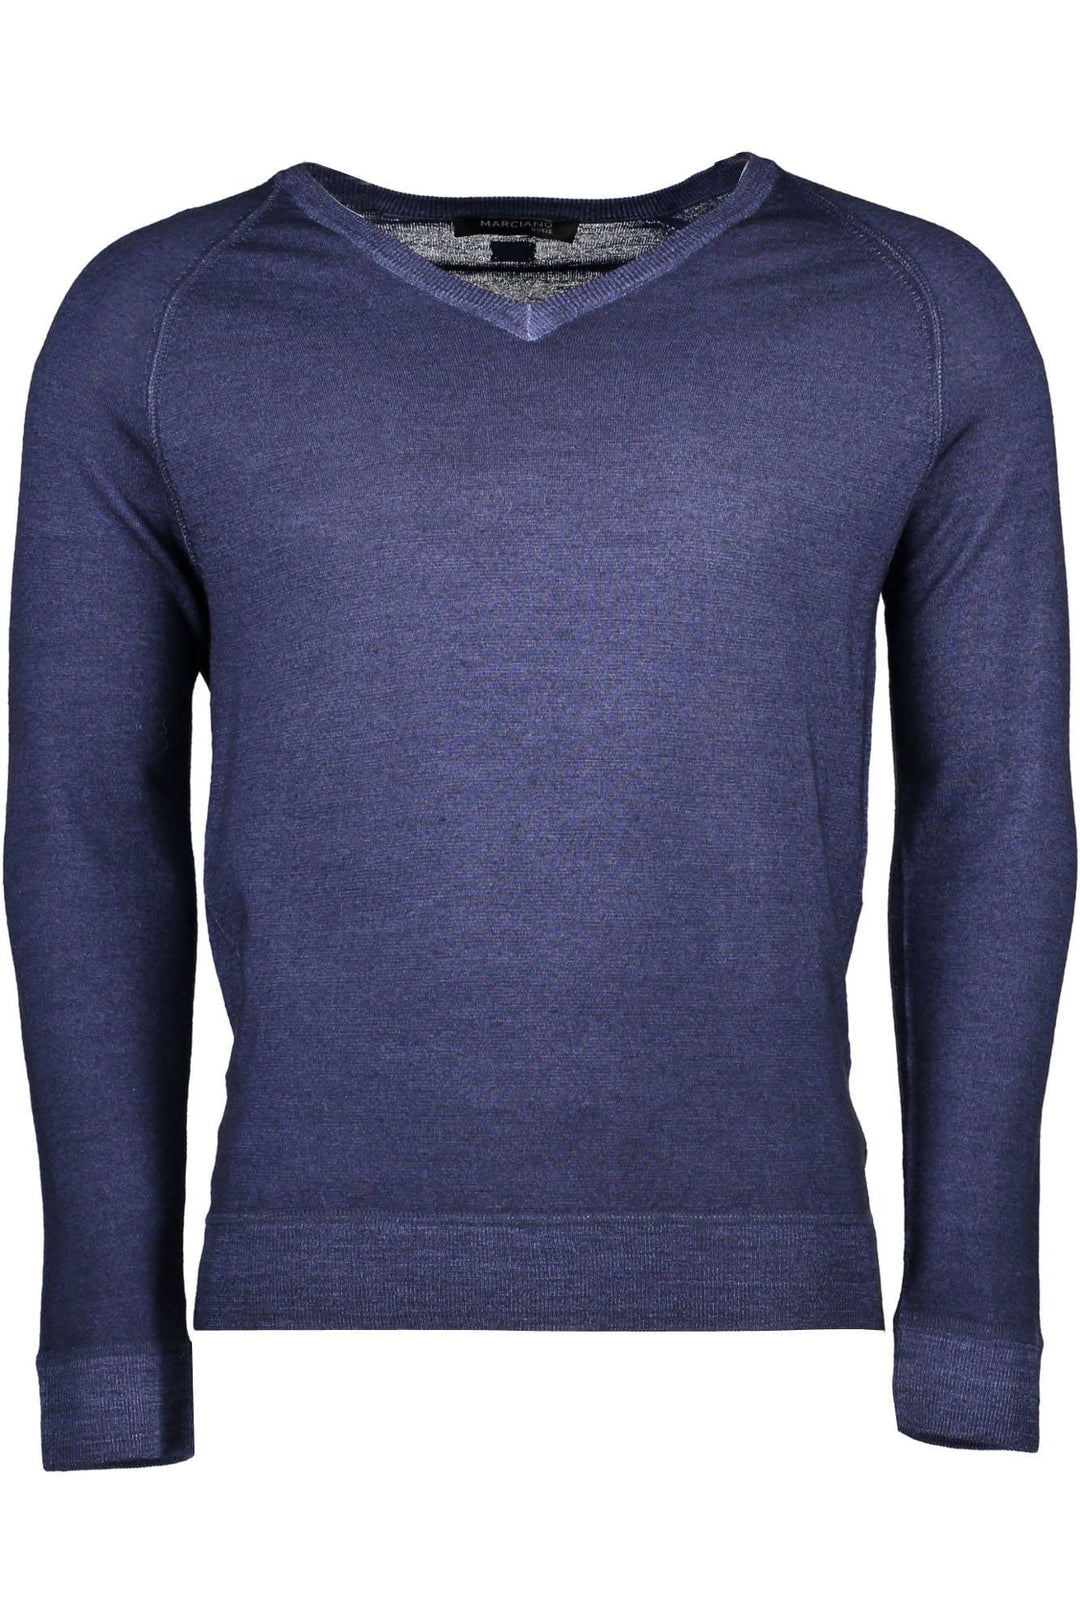 GUESS MARCIANO MEN&#39;S BLUE SWEATER